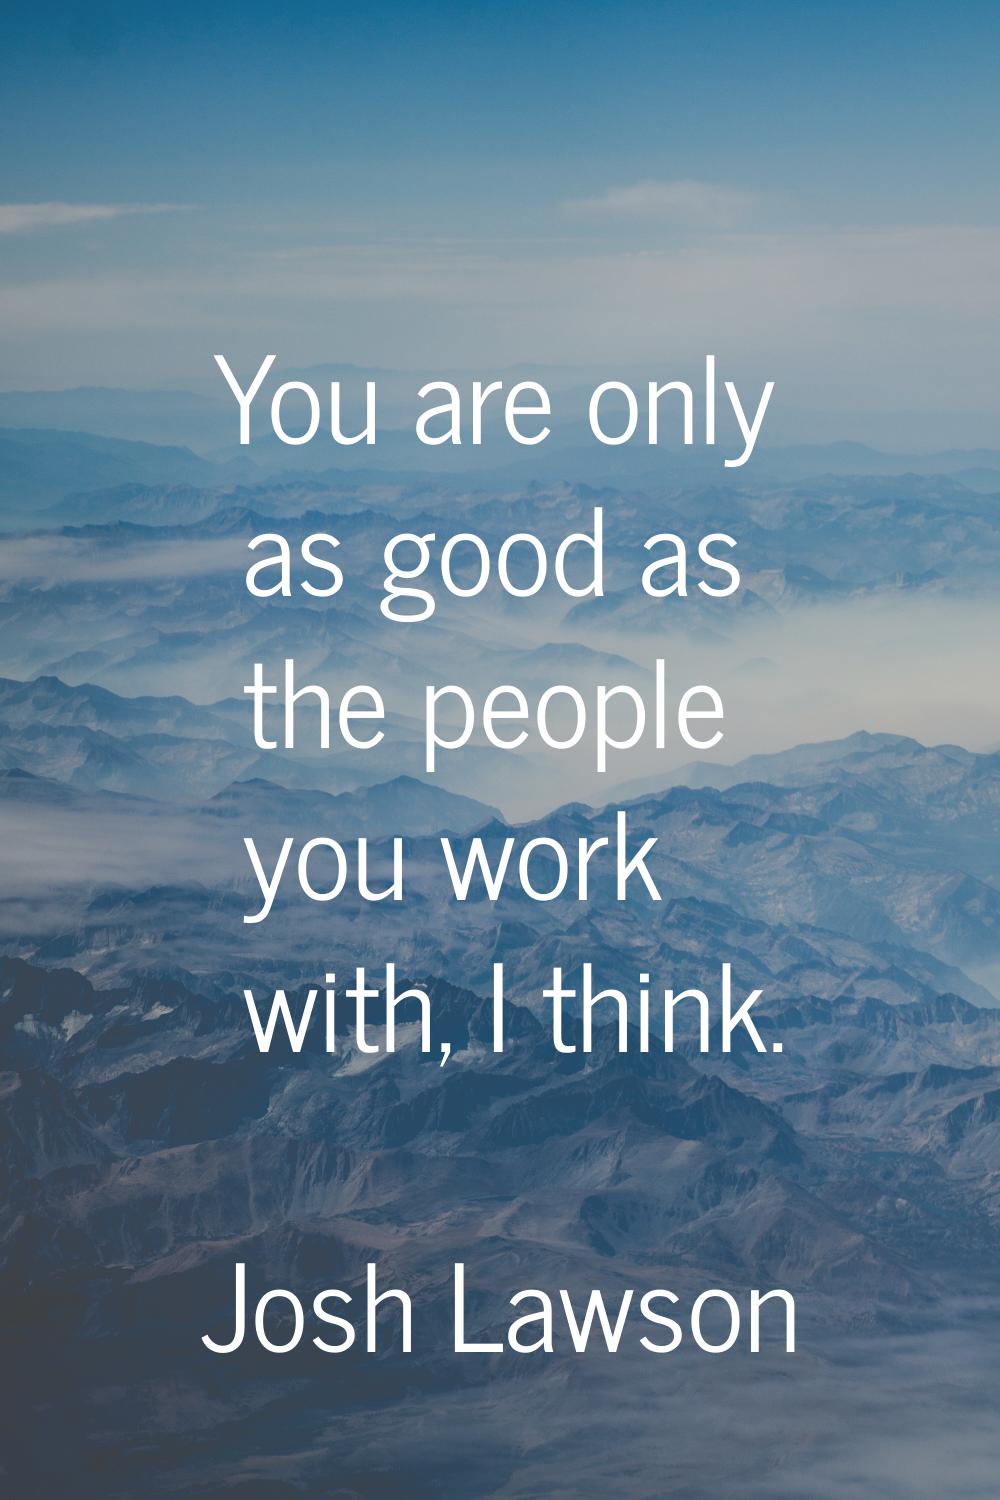 You are only as good as the people you work with, I think.